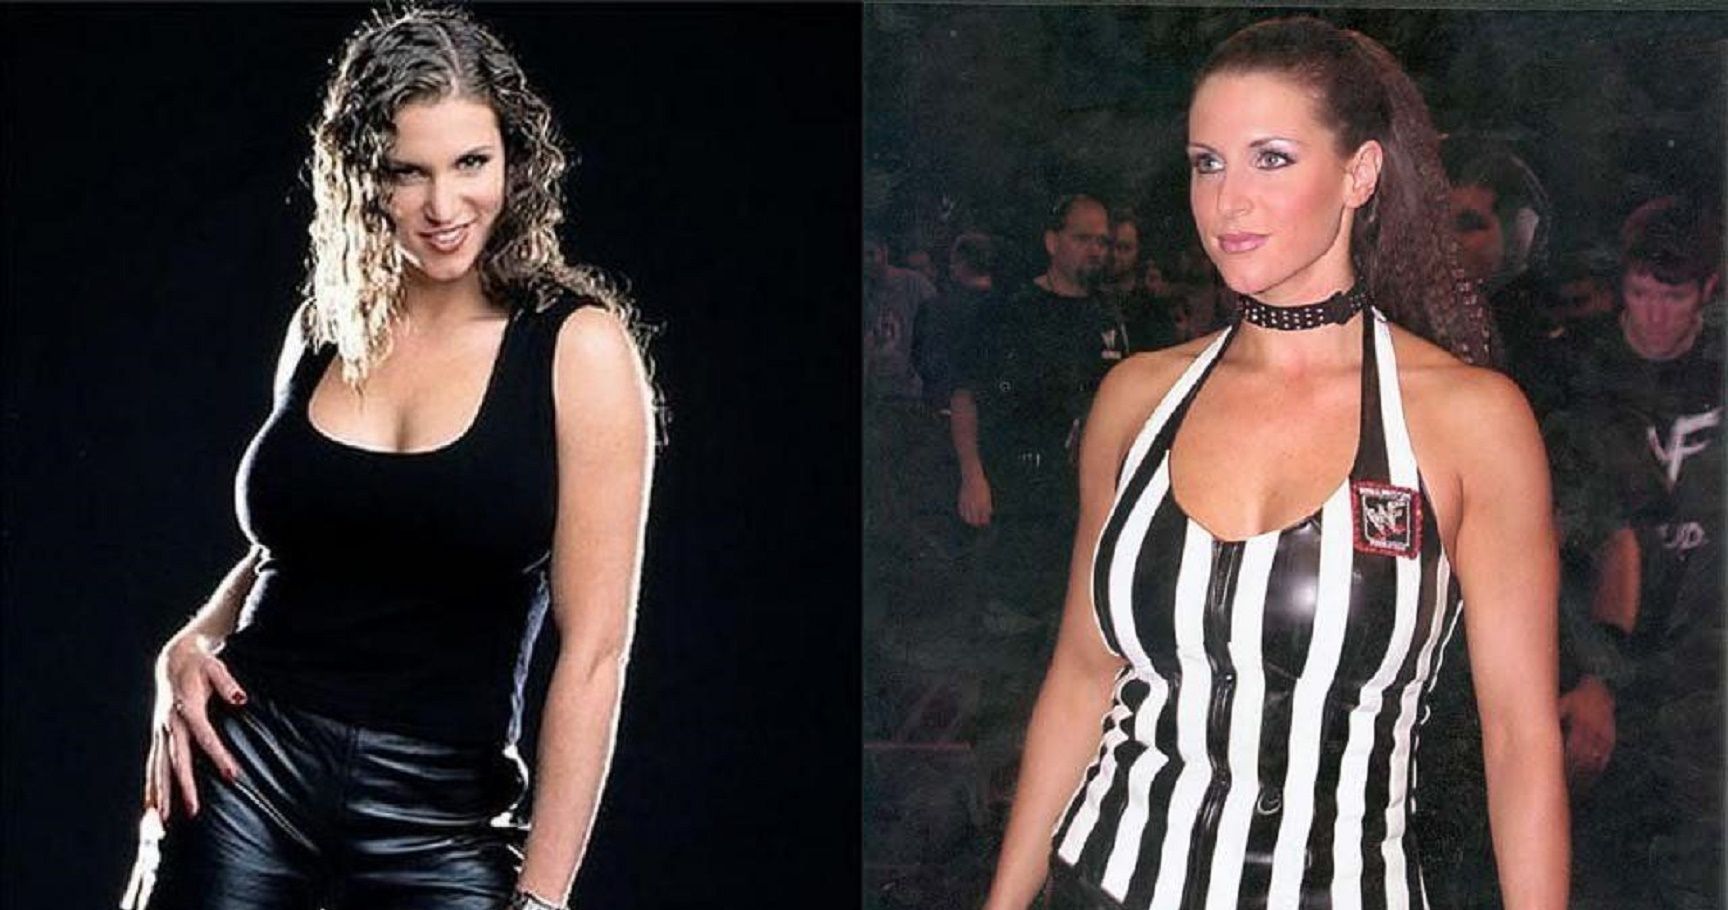 Wwe Sterphan Xxx Sex - Top 20 Hot Pictures of Stephanie McMahon You NEED to See